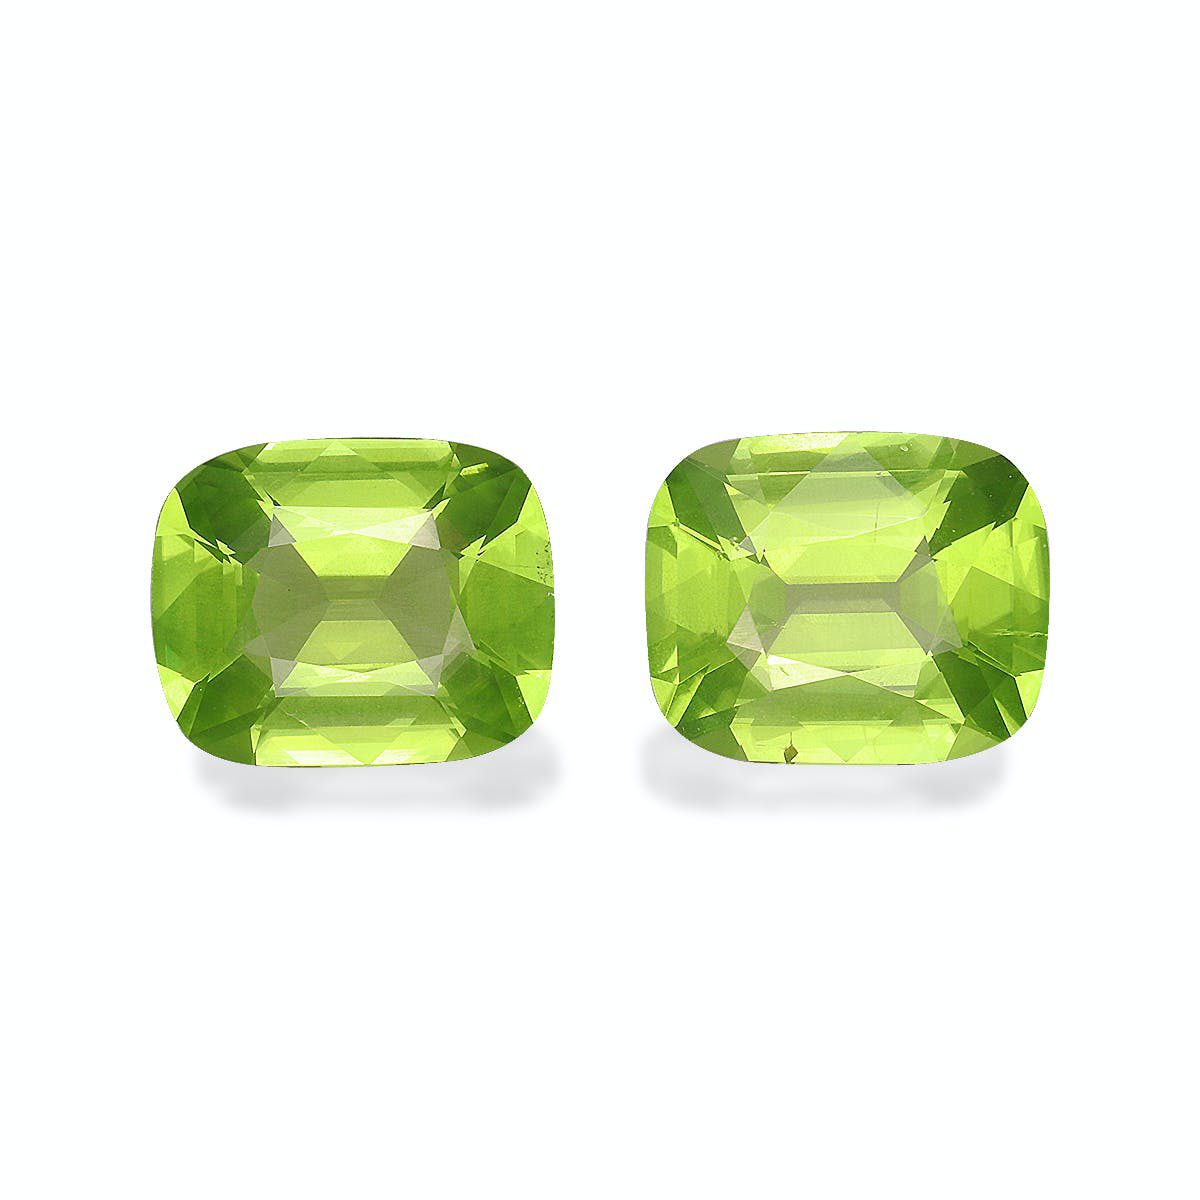 Picture of Lime Green Peridot 7.29ct - 11x9mm Pair (PD0123)